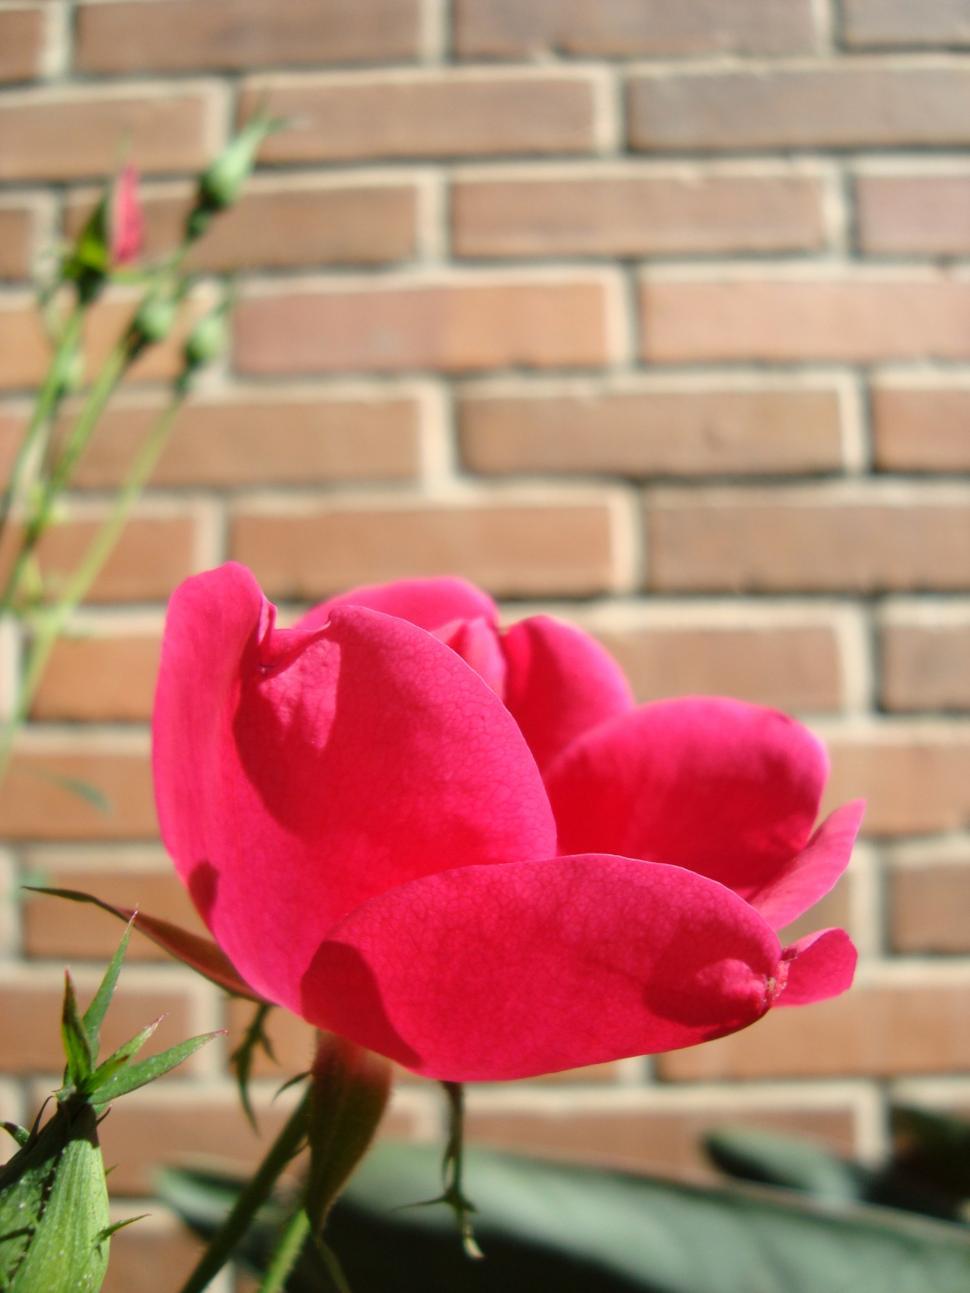 Free Image of Pink Rose in Front of Brick Wall 